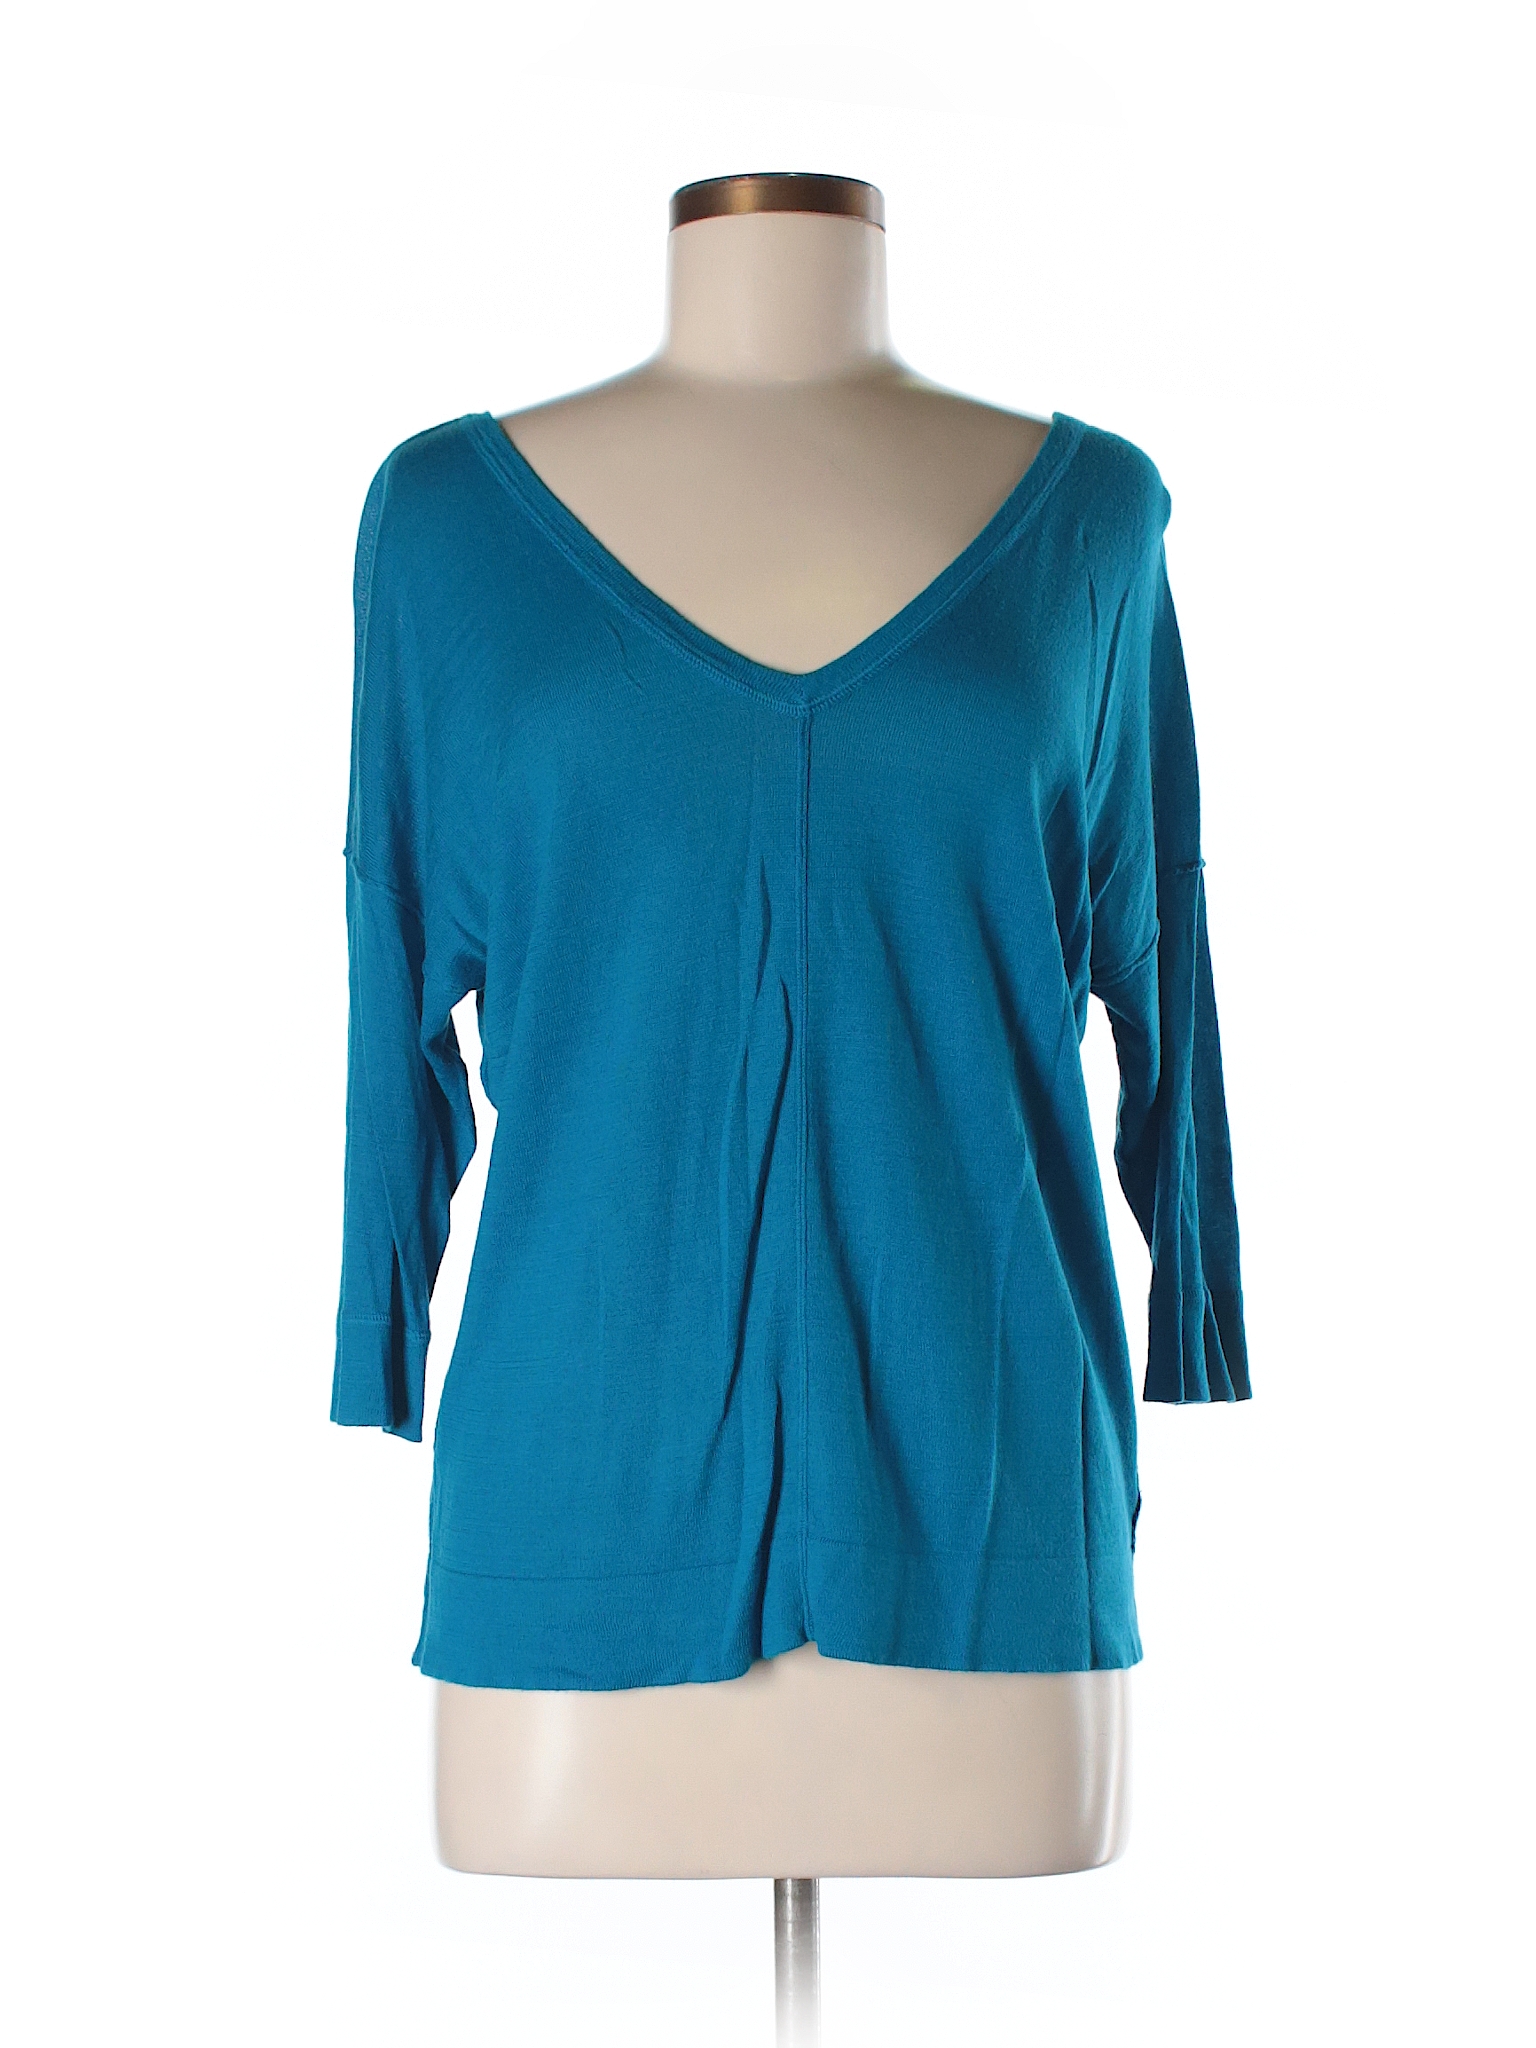 Willi Smith Solid Teal 3/4 Sleeve Top Size M - 58% off | thredUP